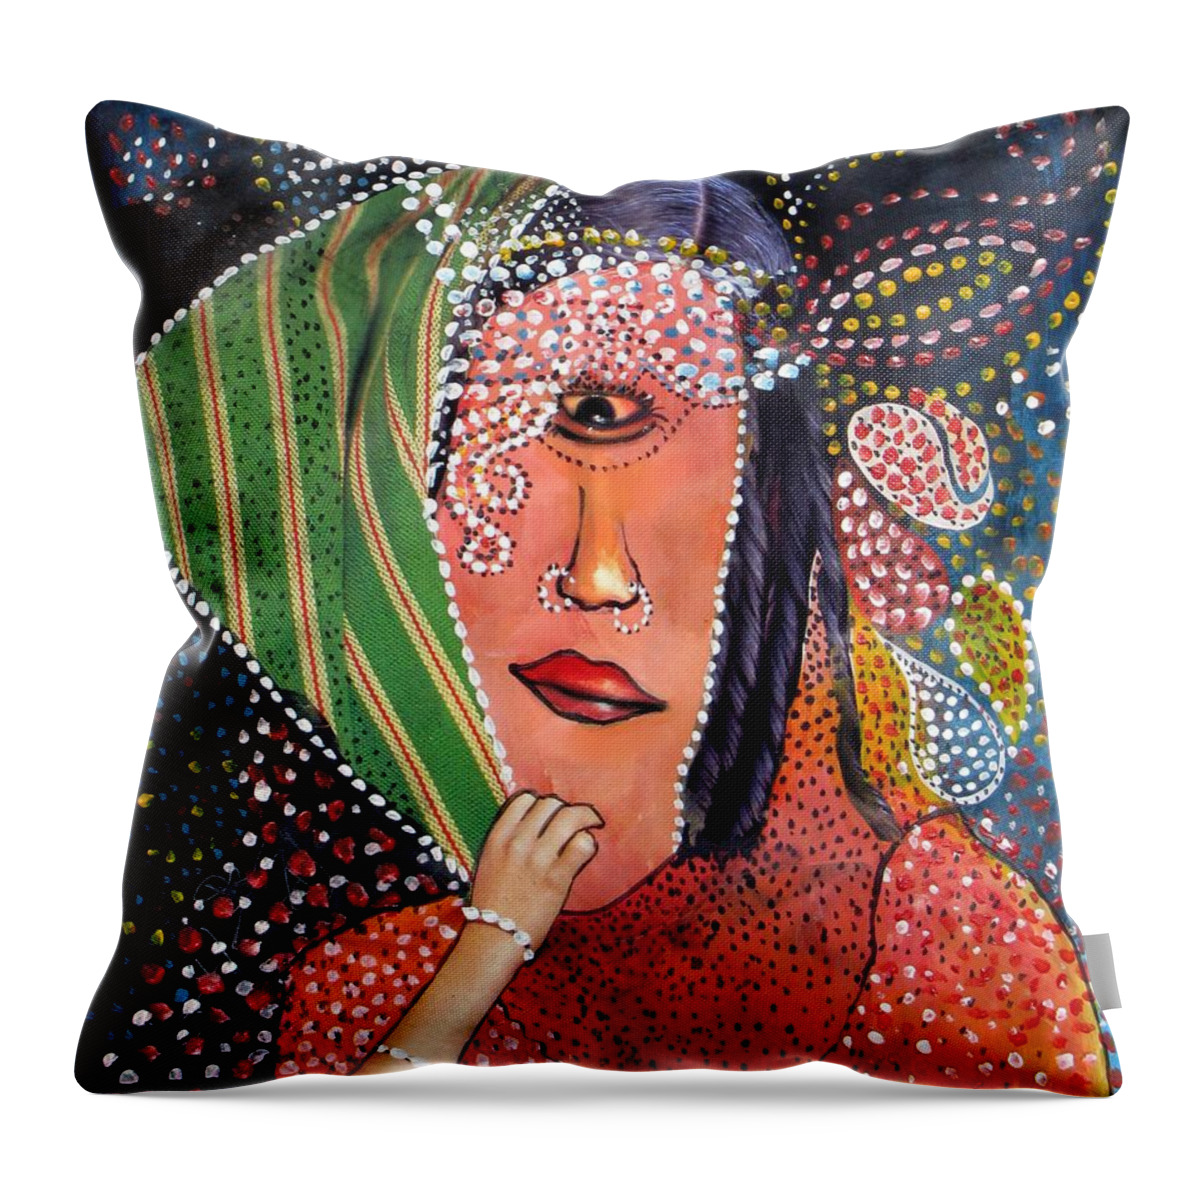 Woman Throw Pillow featuring the mixed media Indra by Veronica Jackson